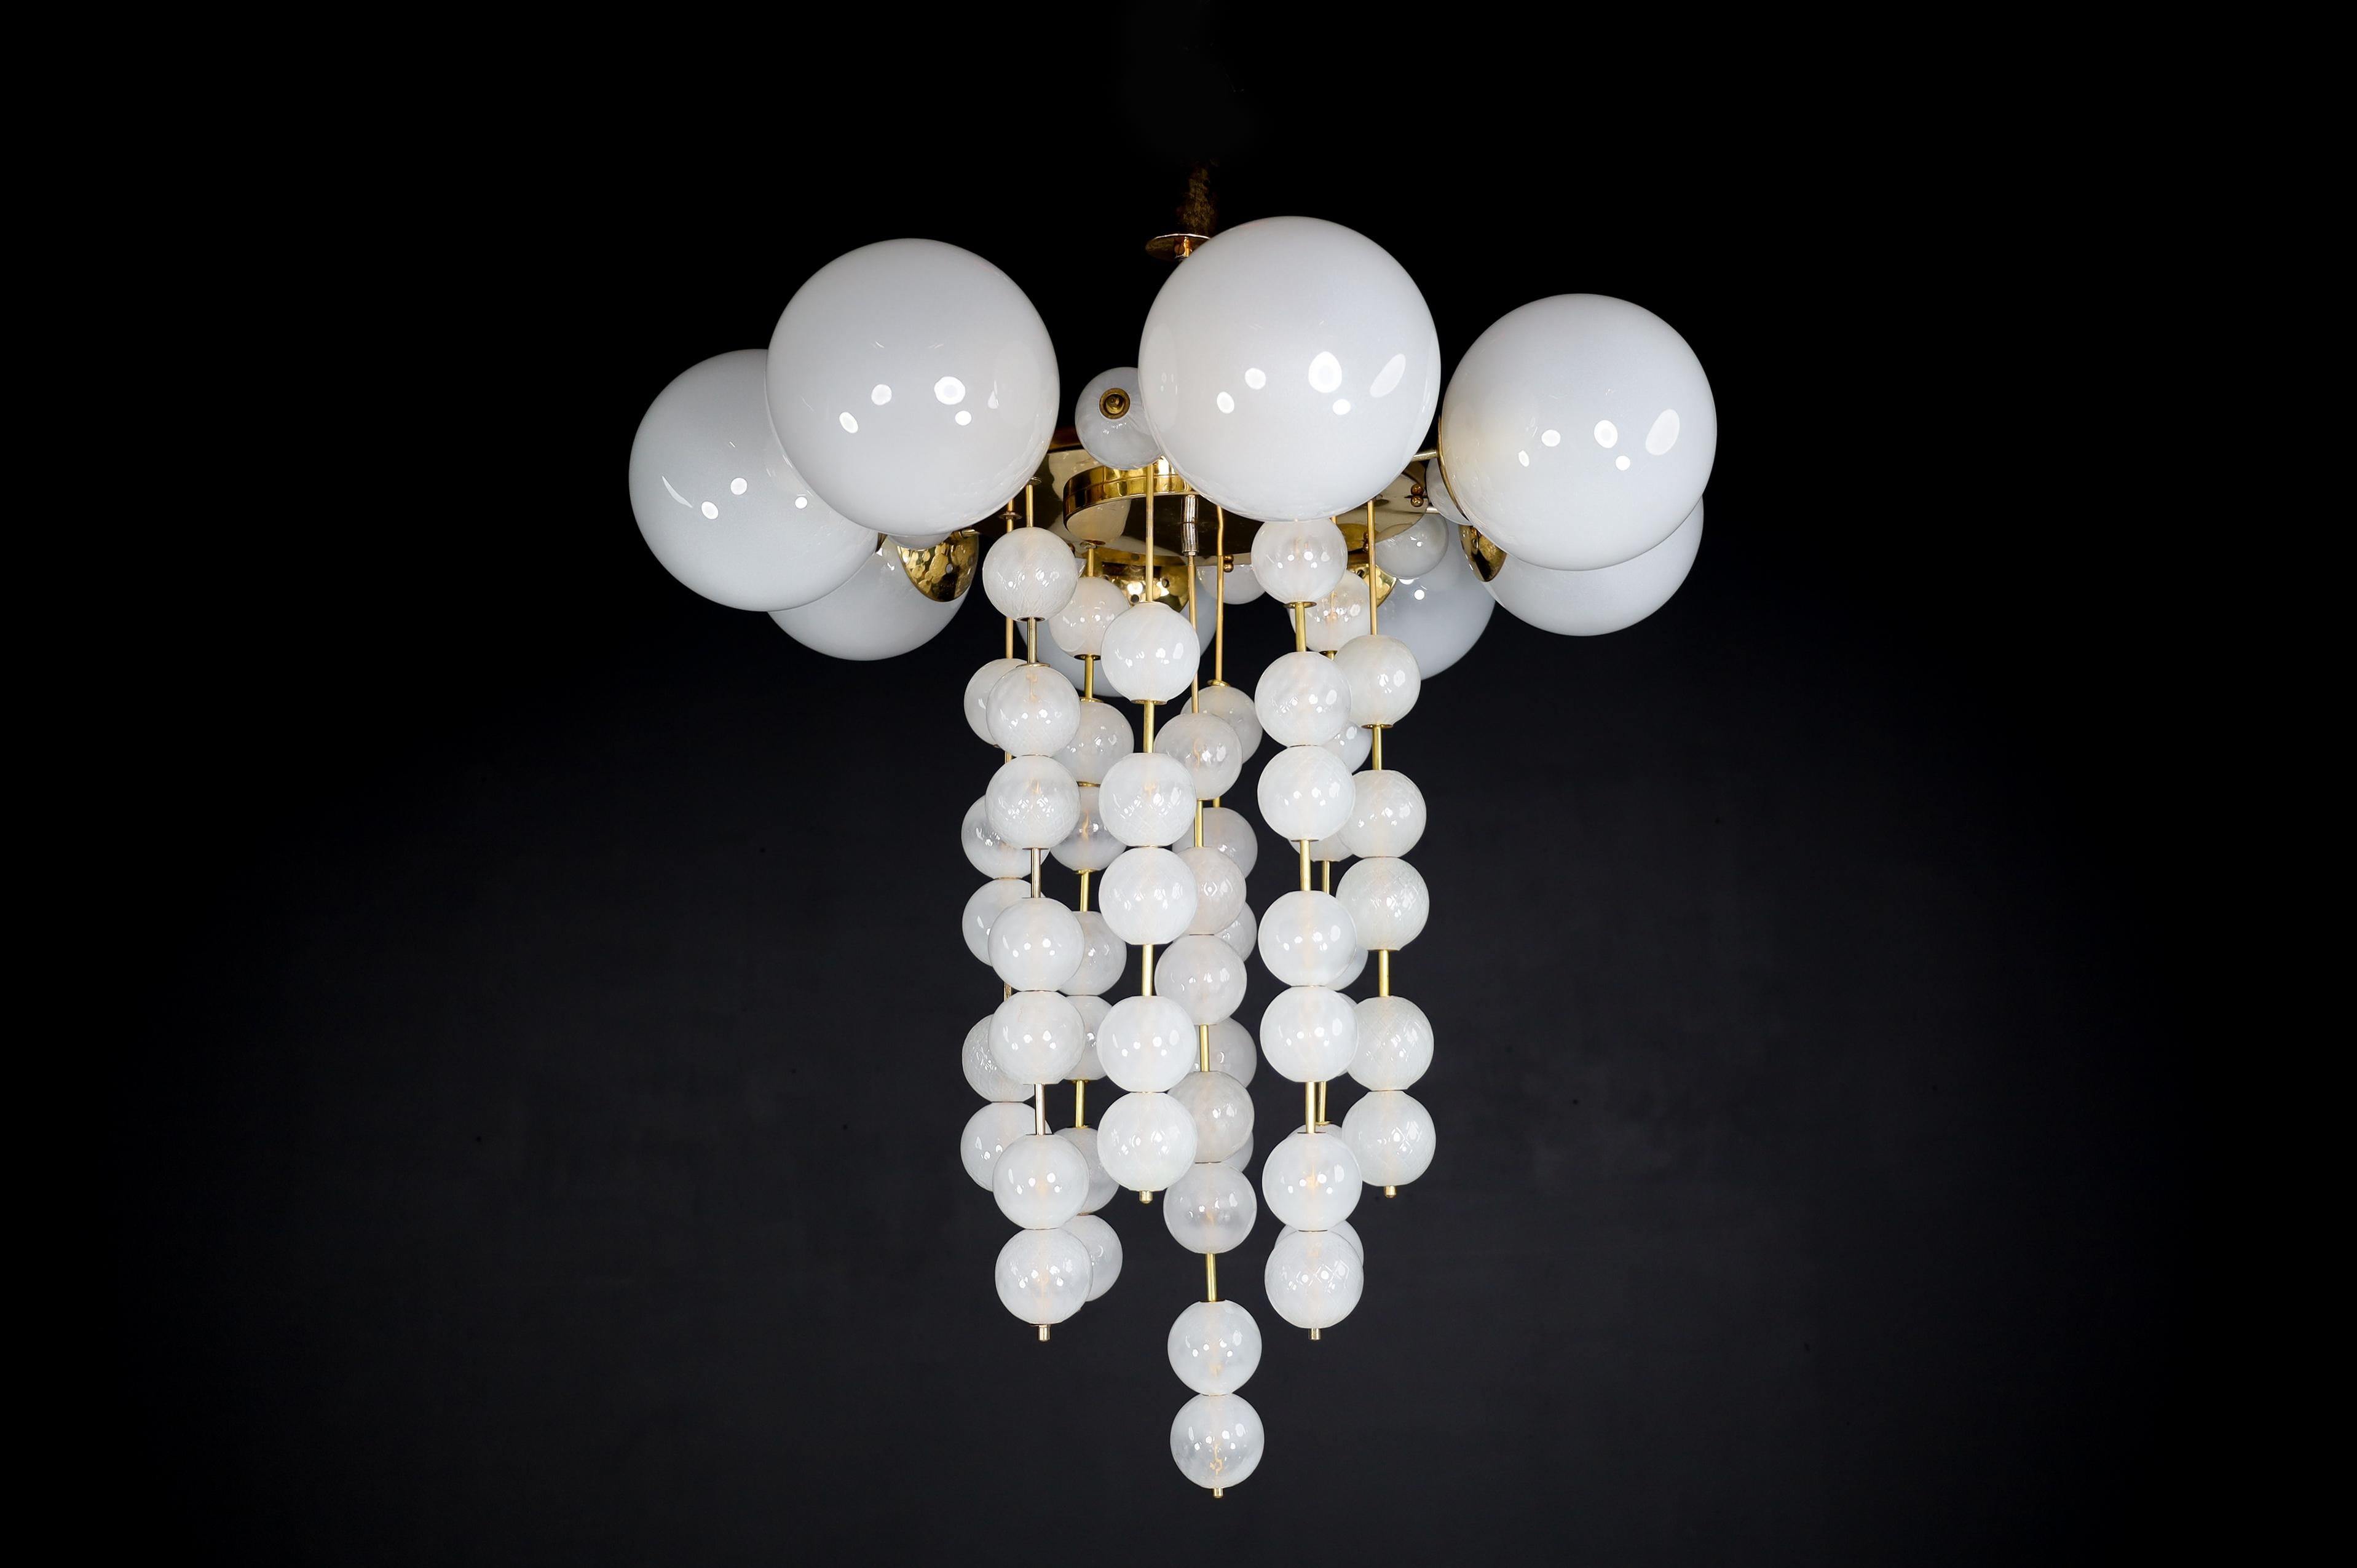 Grand Chandelier with brass fixture and hand-blowed frosted glass globes, Czechia 1950s

A large chandelier with a brass fixture was produced and designed in Czechia in the 1960s. A total of six large frosted glass globes and multiple smaller